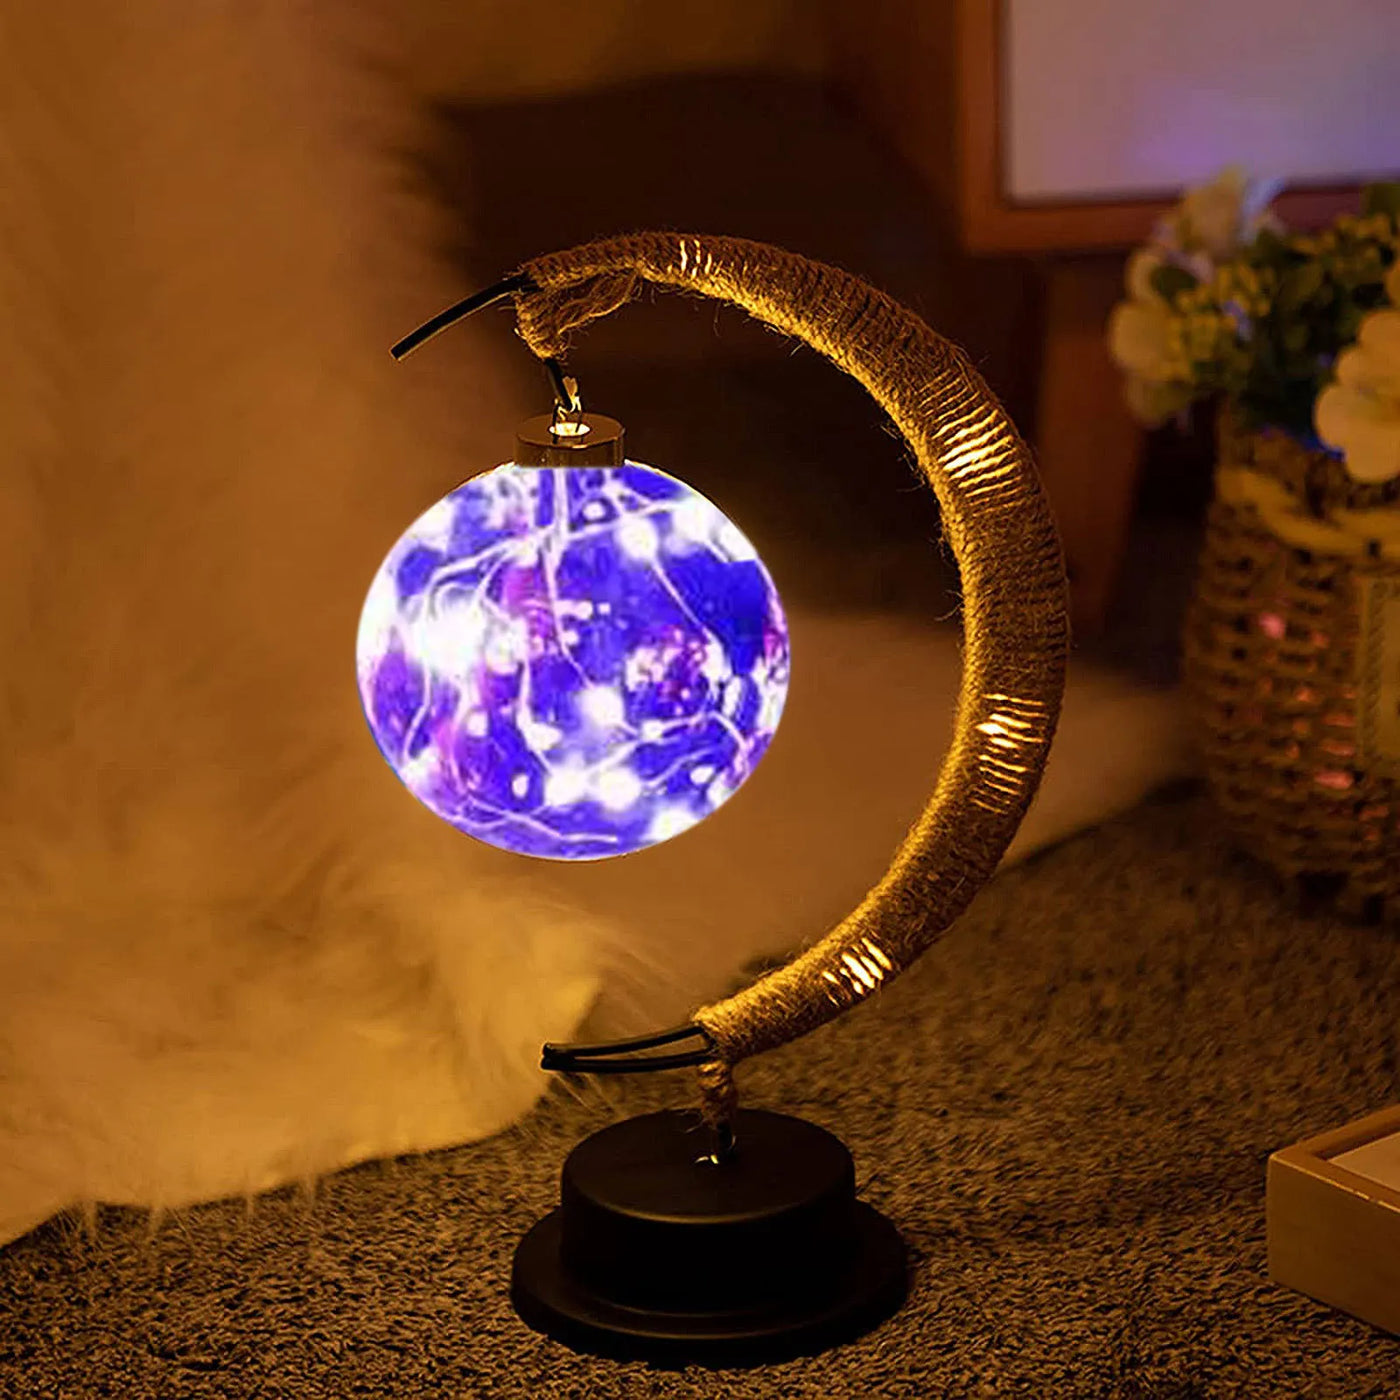 Enchanted Lunar Lamp Hanging Memorial Moon LED Moon Lamp Ball Night Light with Stand Crescent Bedroom Table Kids Festival Gifts